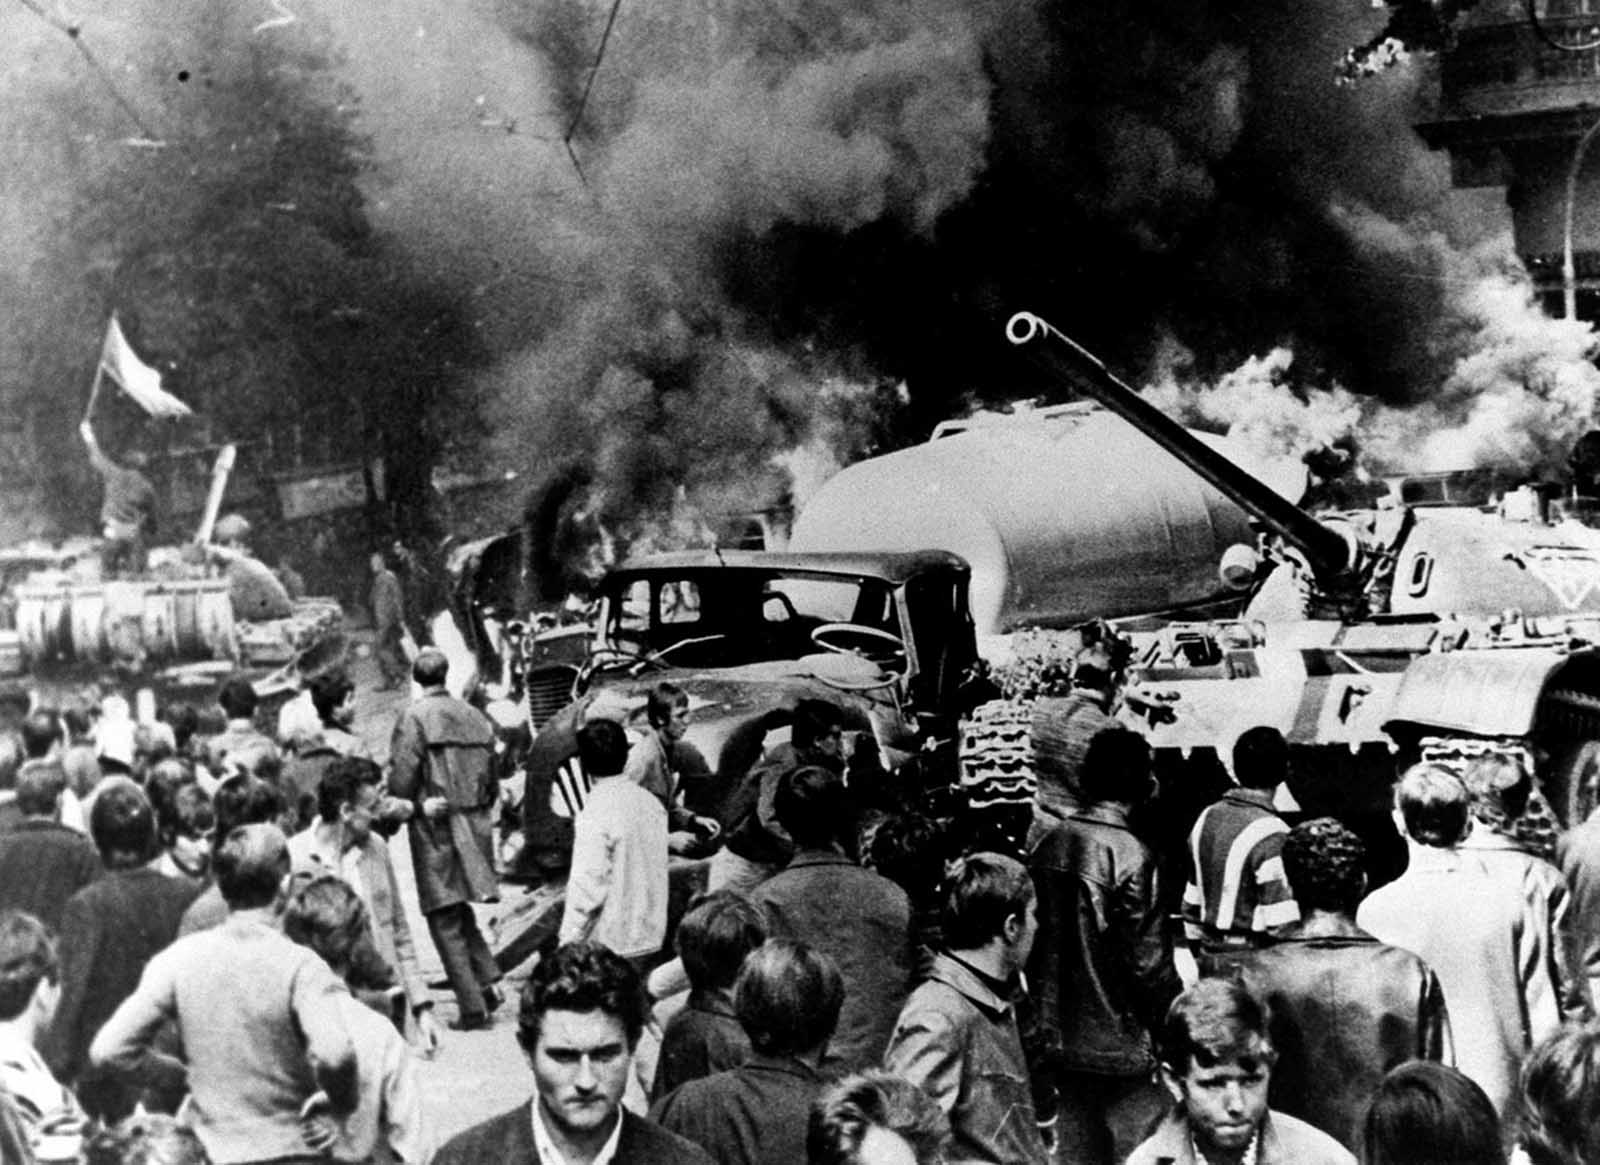 A Soviet tank, burning vehicles, and sullen citizens are seen in Prague on August 21, 1968, as Soviet troops entered the Czechoslovakian capital.